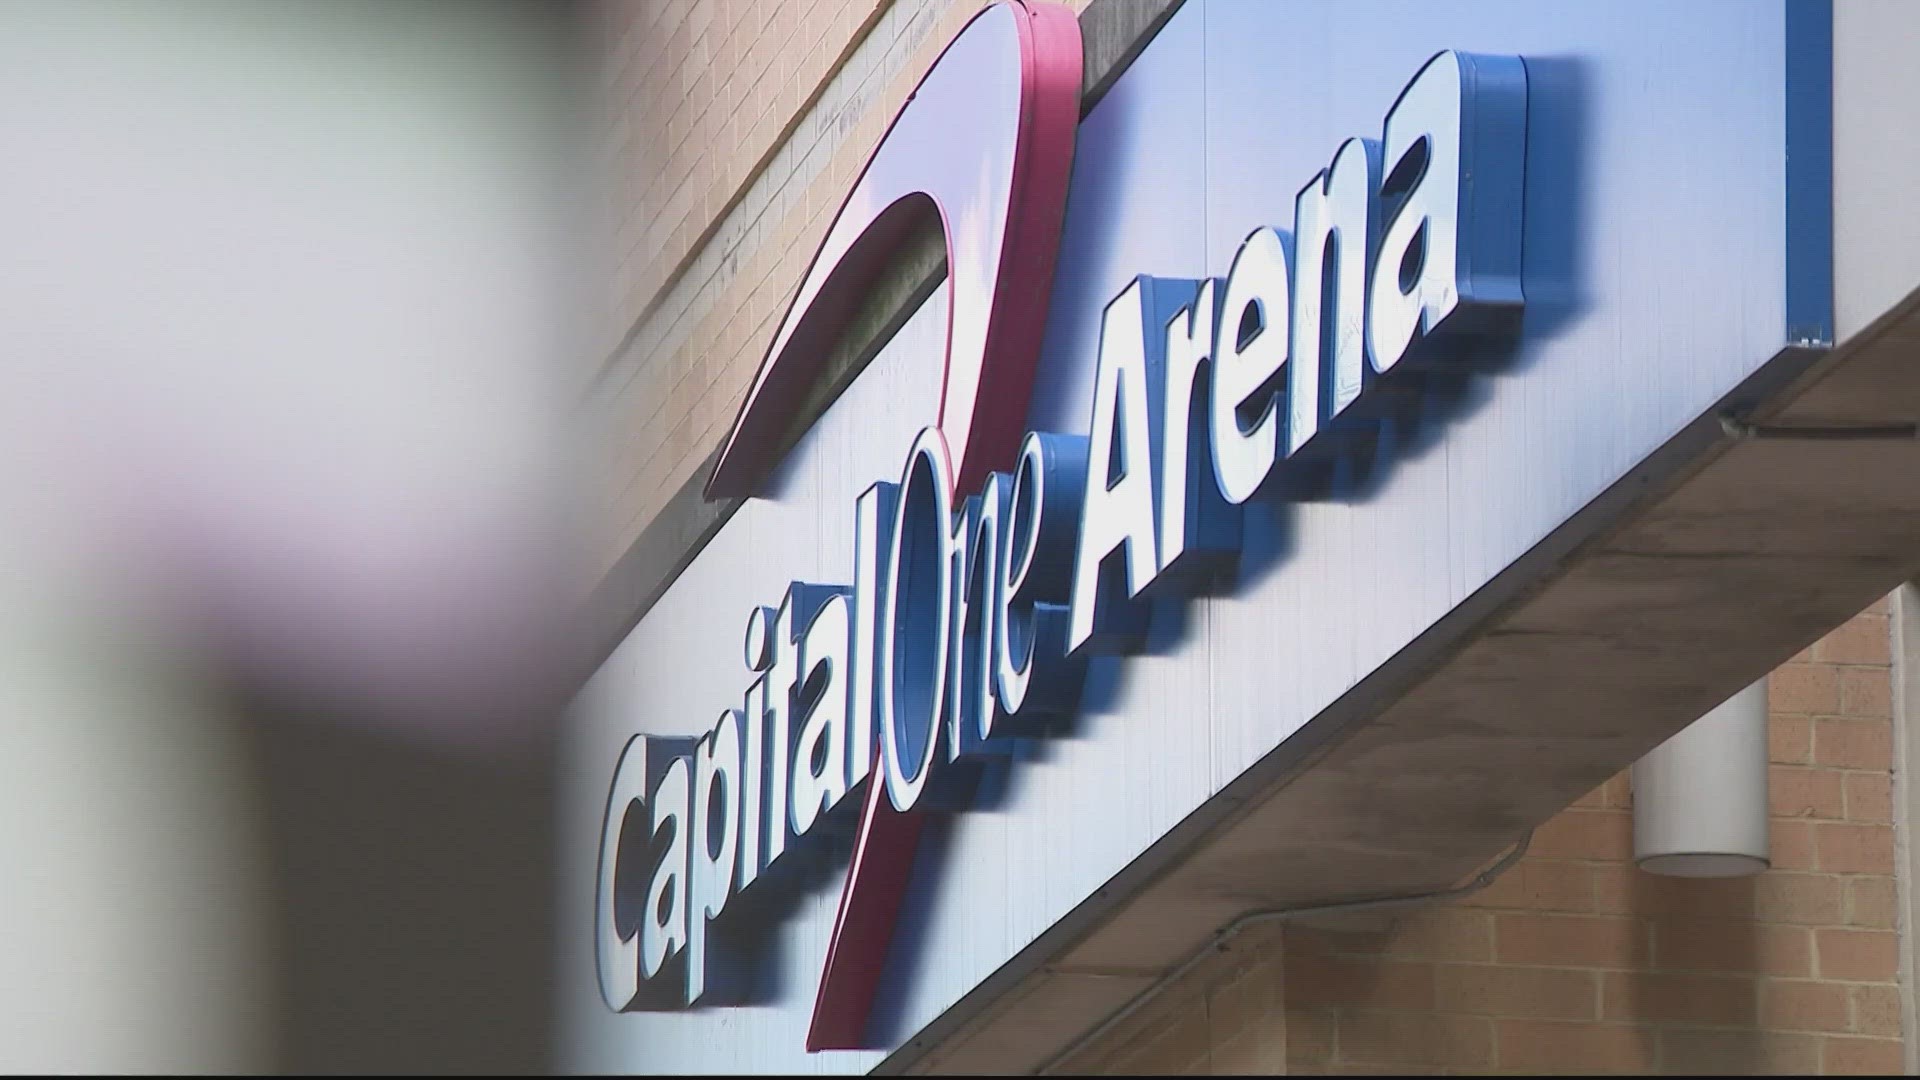 DC studying funding for new Commanders stadium, negotiating potential taxpayer funded upgrades at Capital One Arena